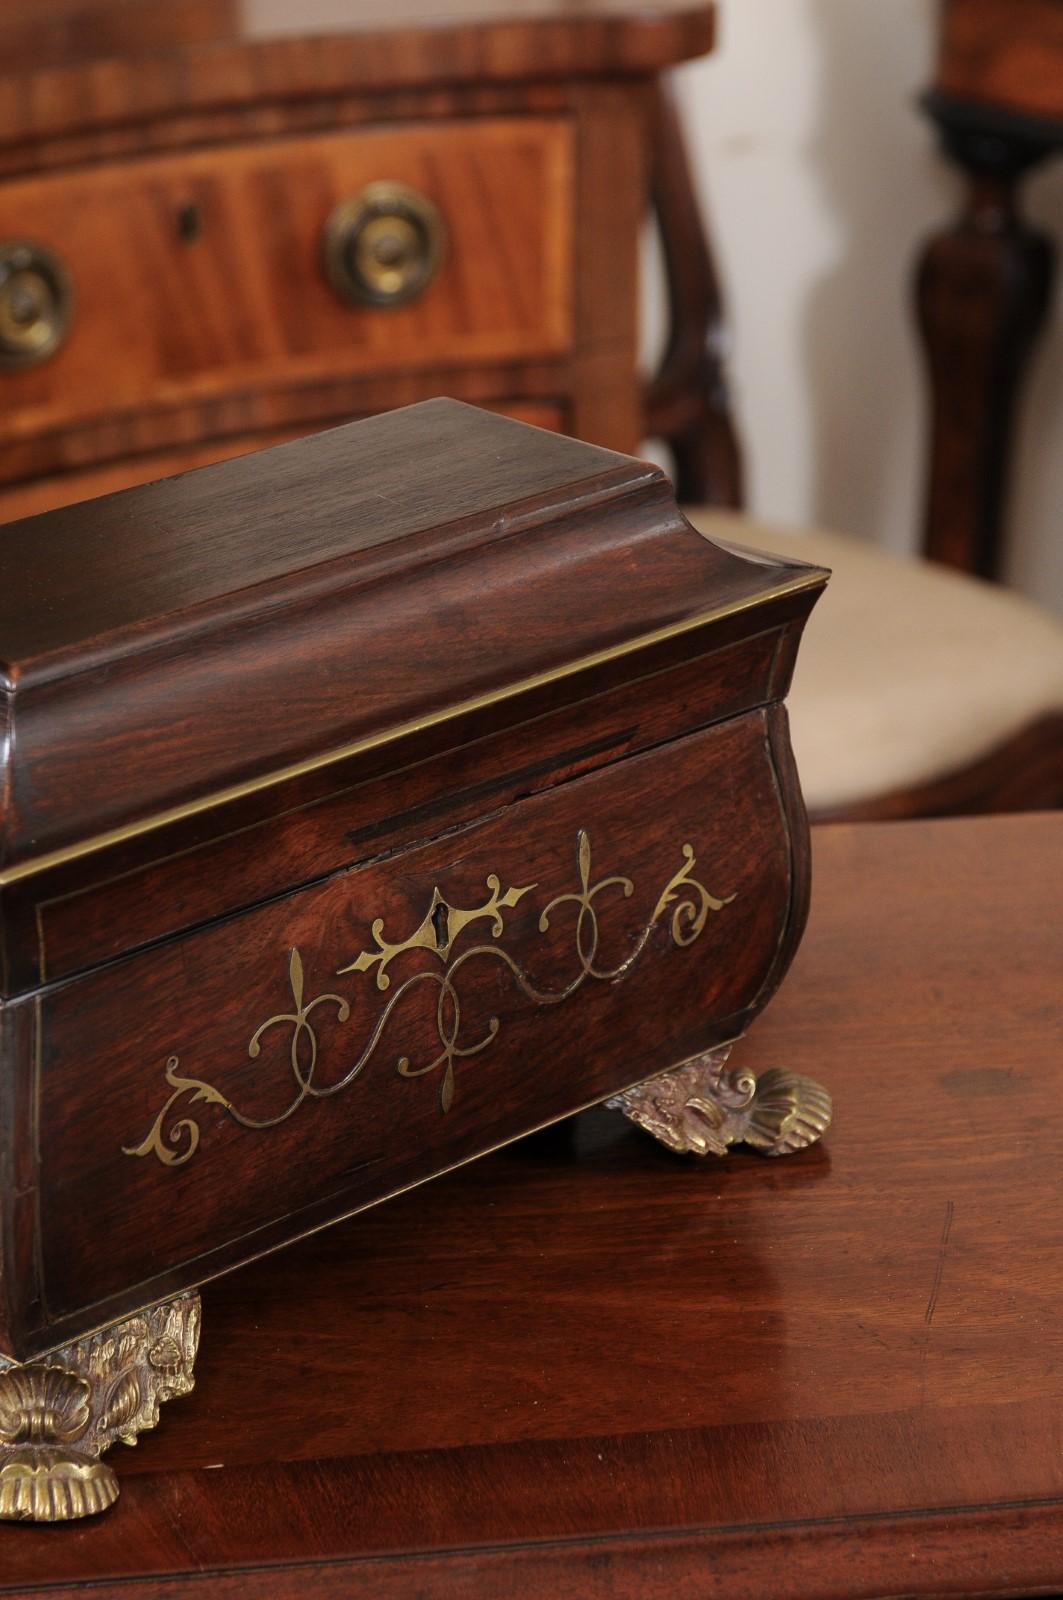 Regency Pagoda Form Work Box with Brass Feet & Inlay, Early 19th Century England For Sale 2